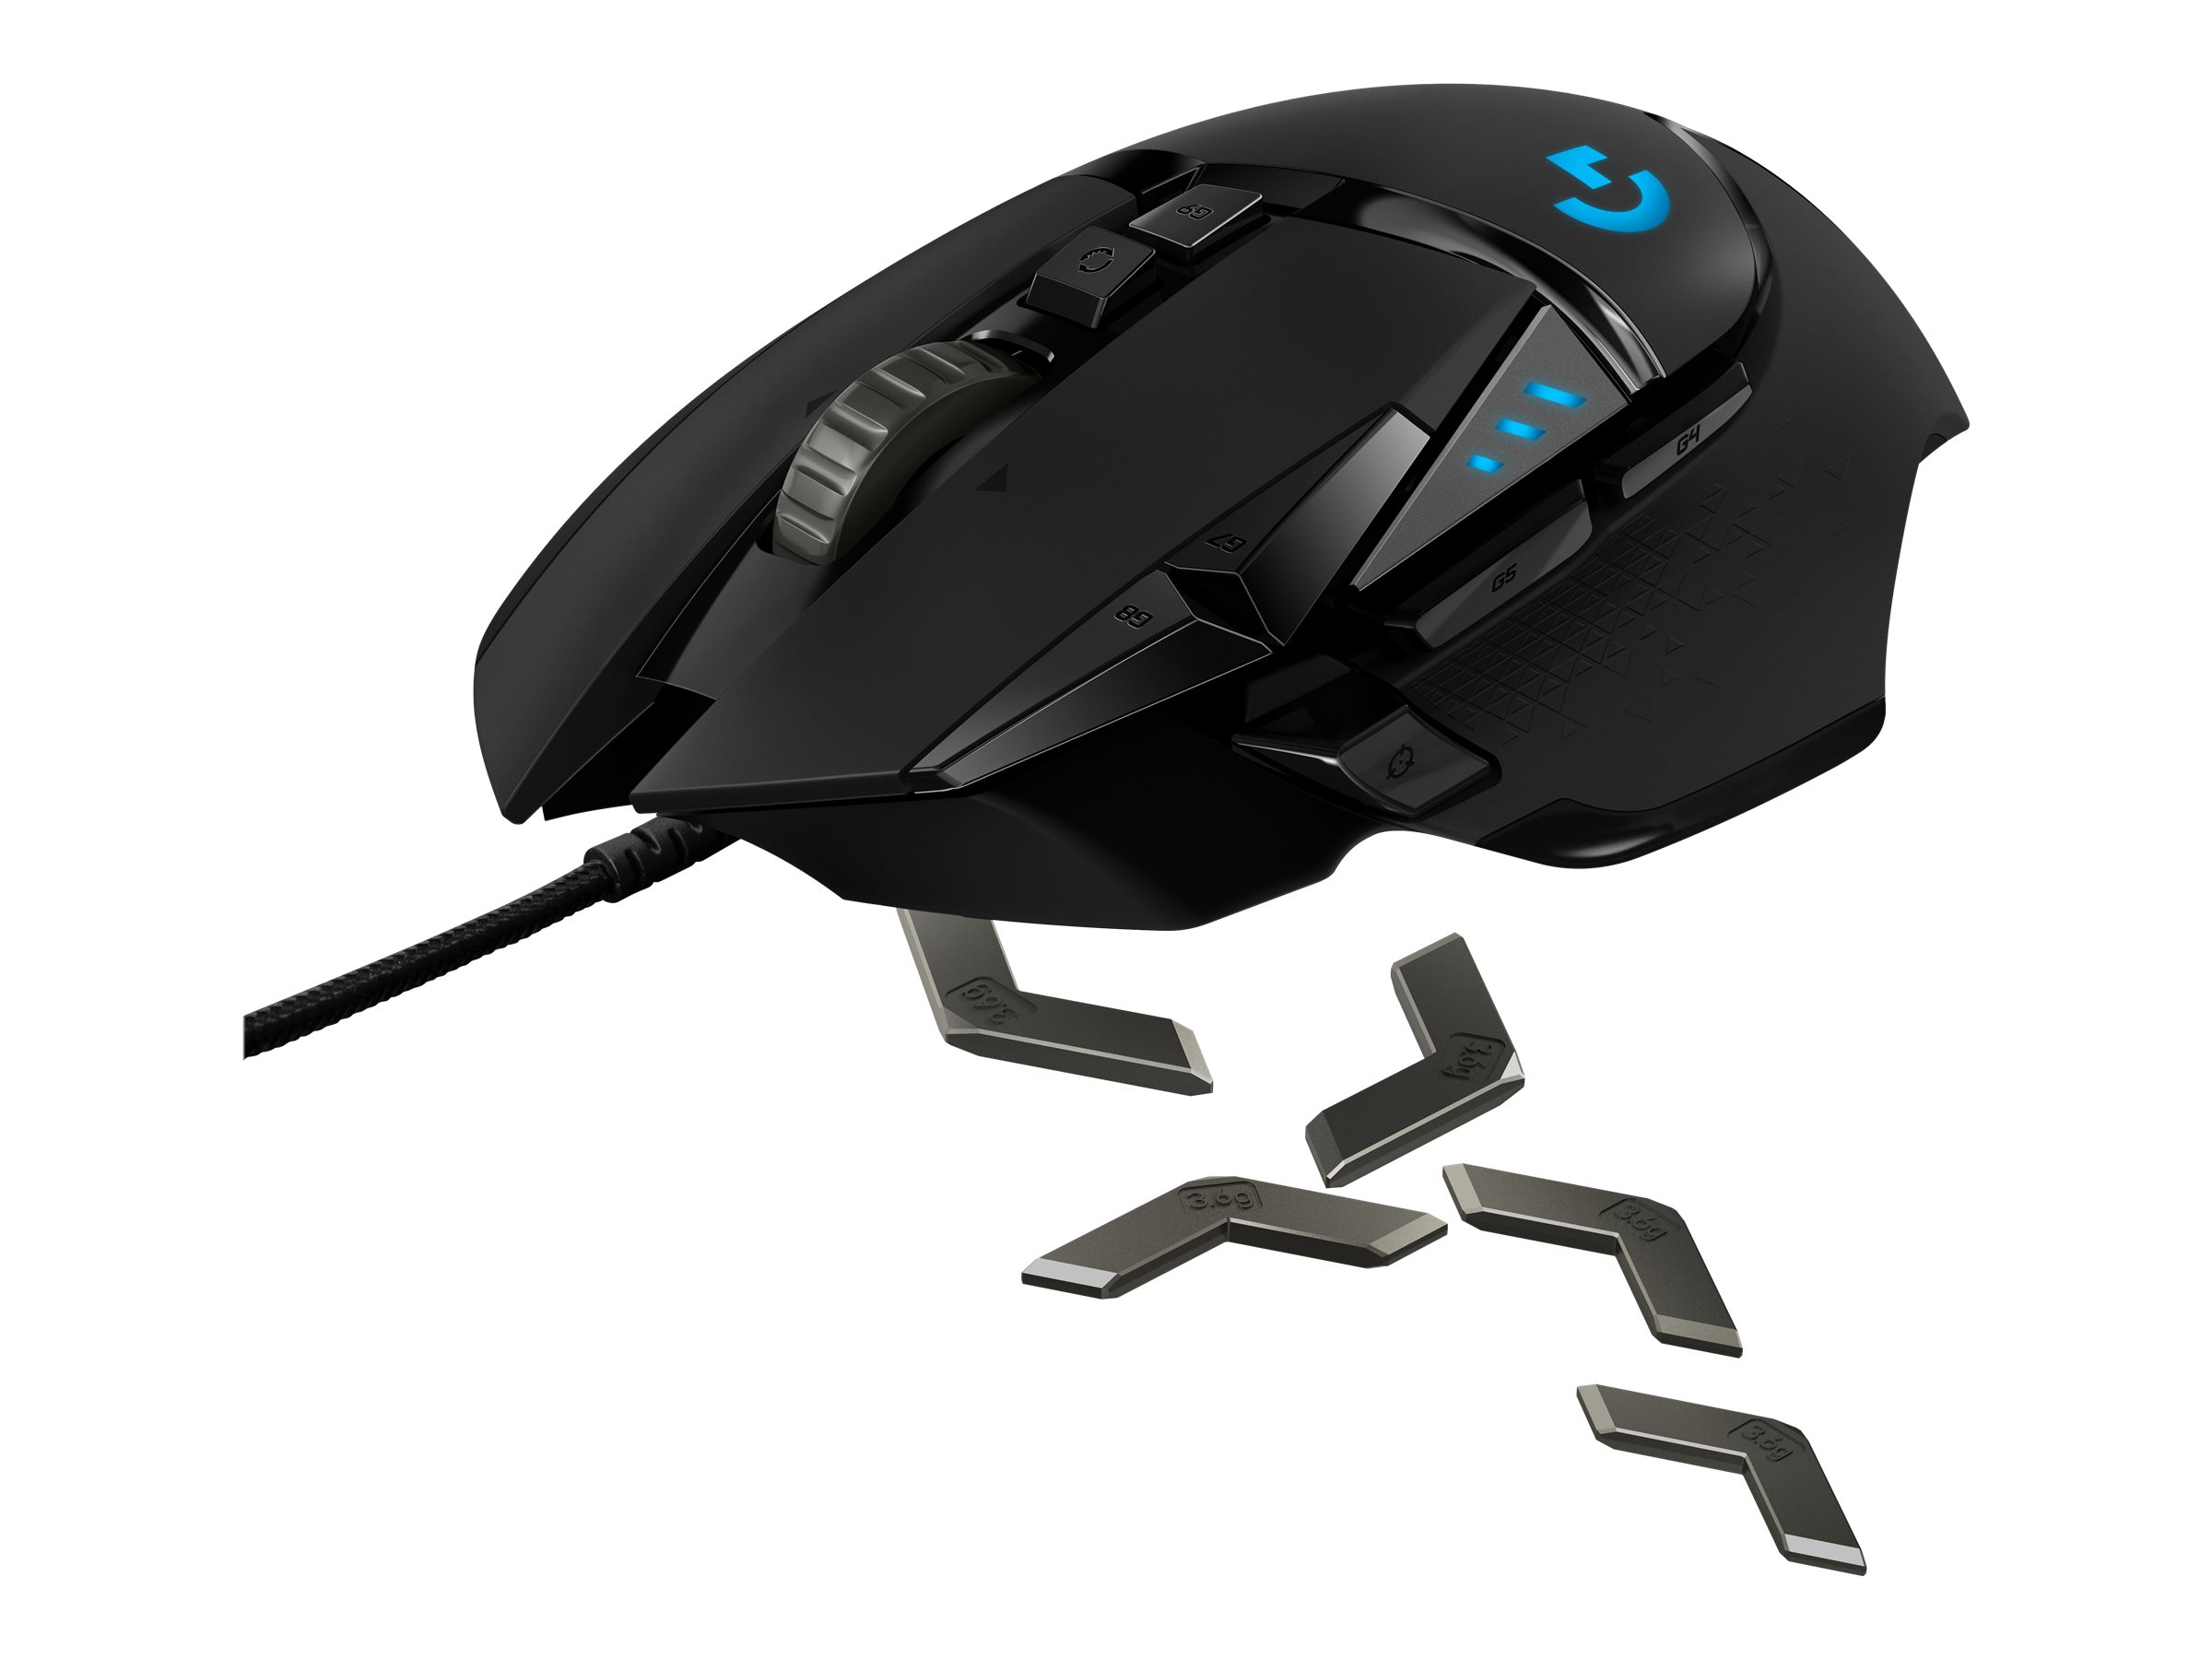 Logitech G502 Hero Wired Gaming Mouse - 910-005469